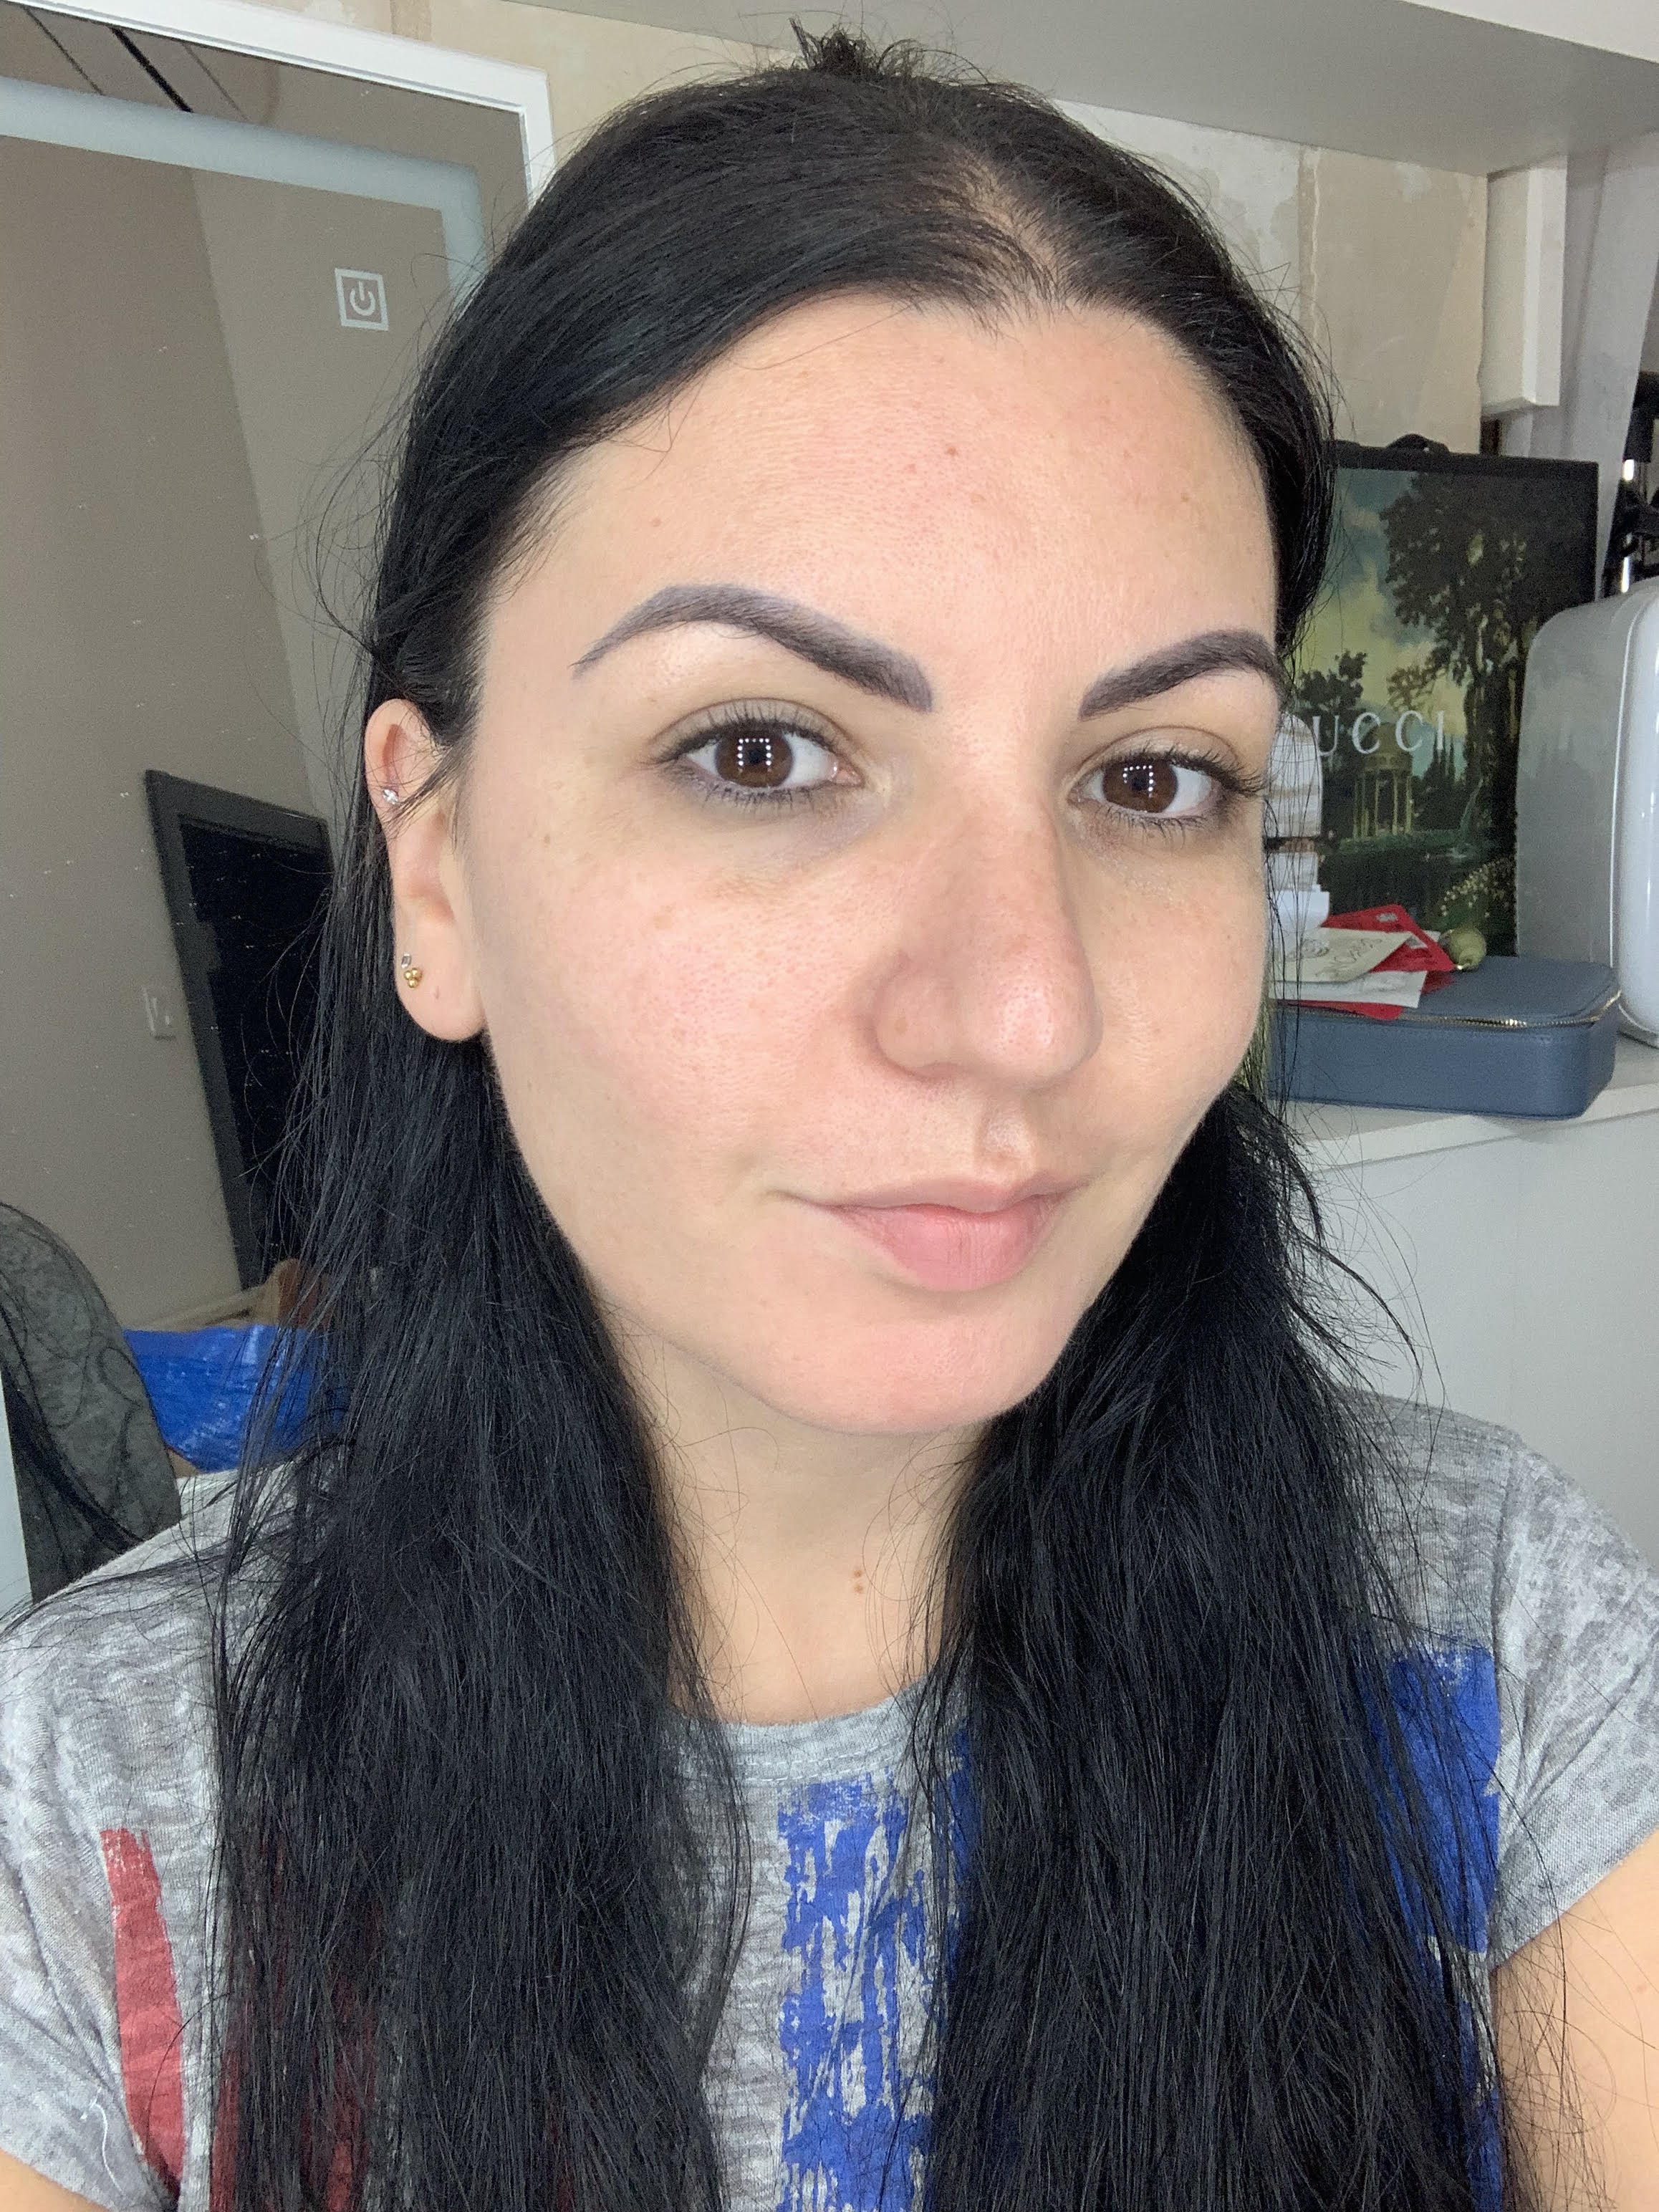 Grecia without makeup - Peaches&Creme K-beauty Skincare